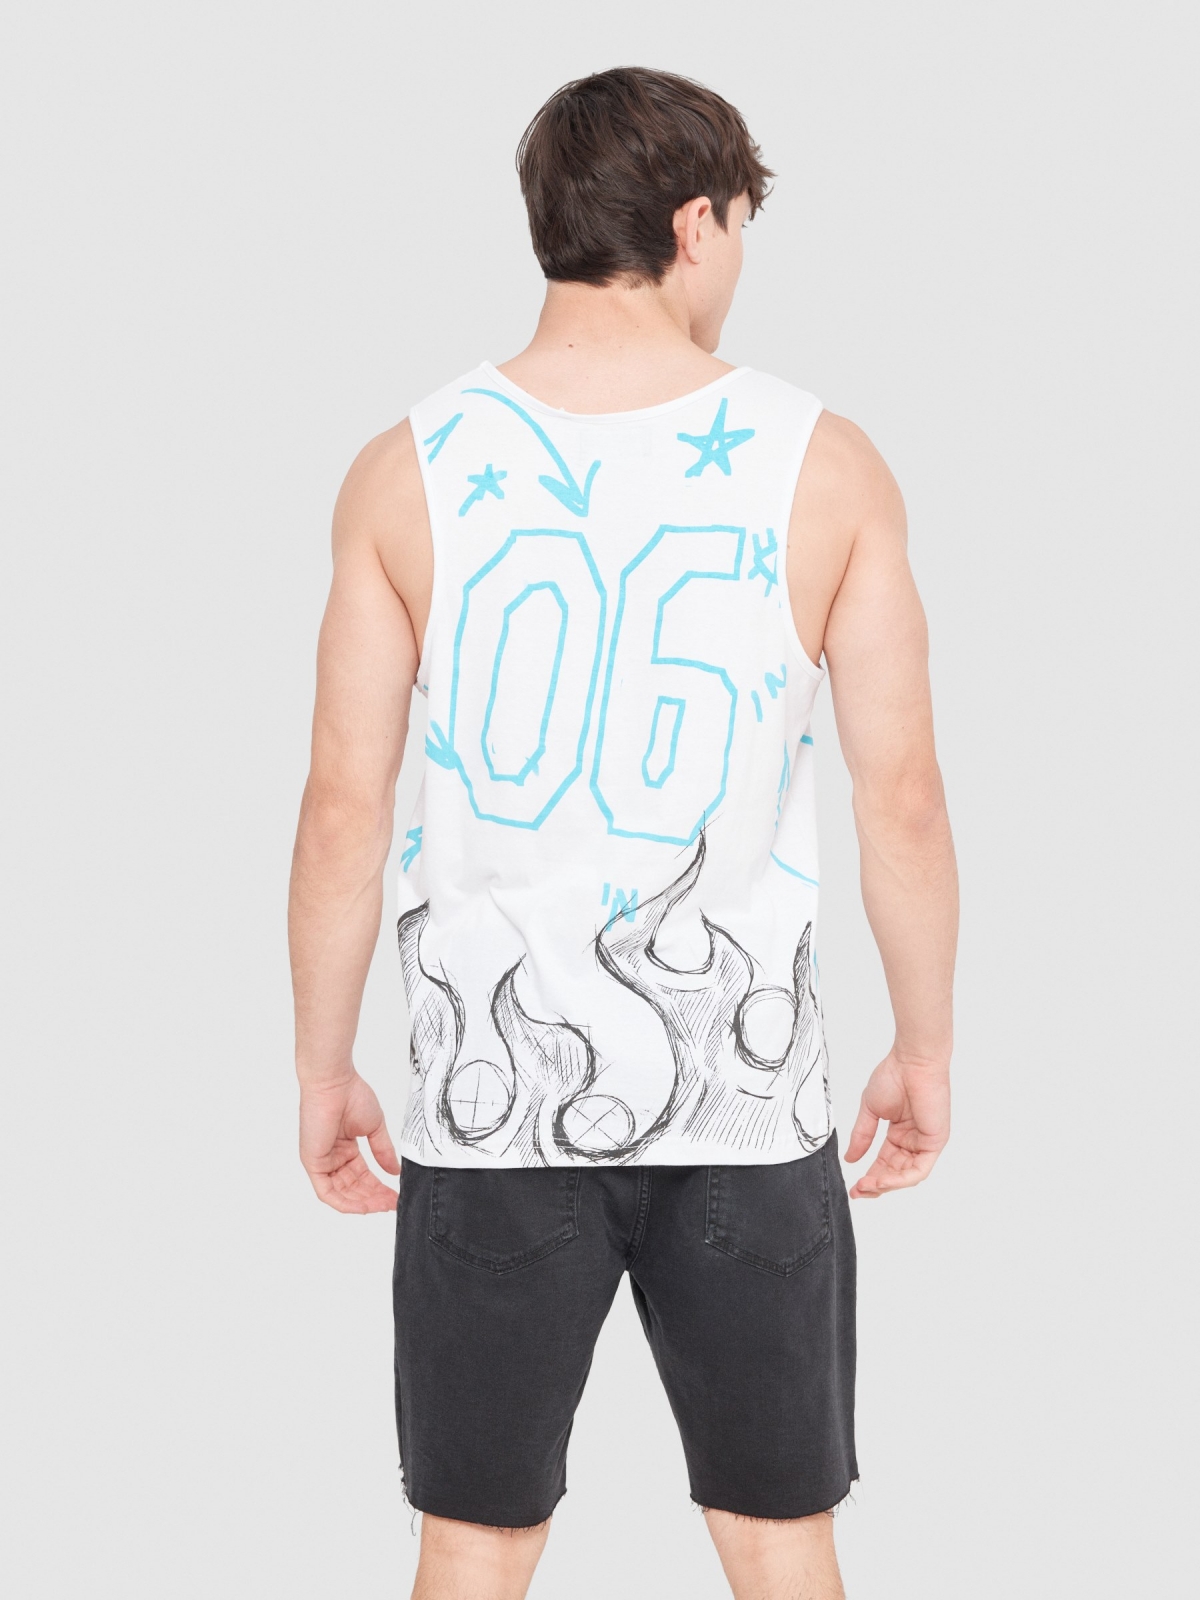 Fire tank top white middle back view